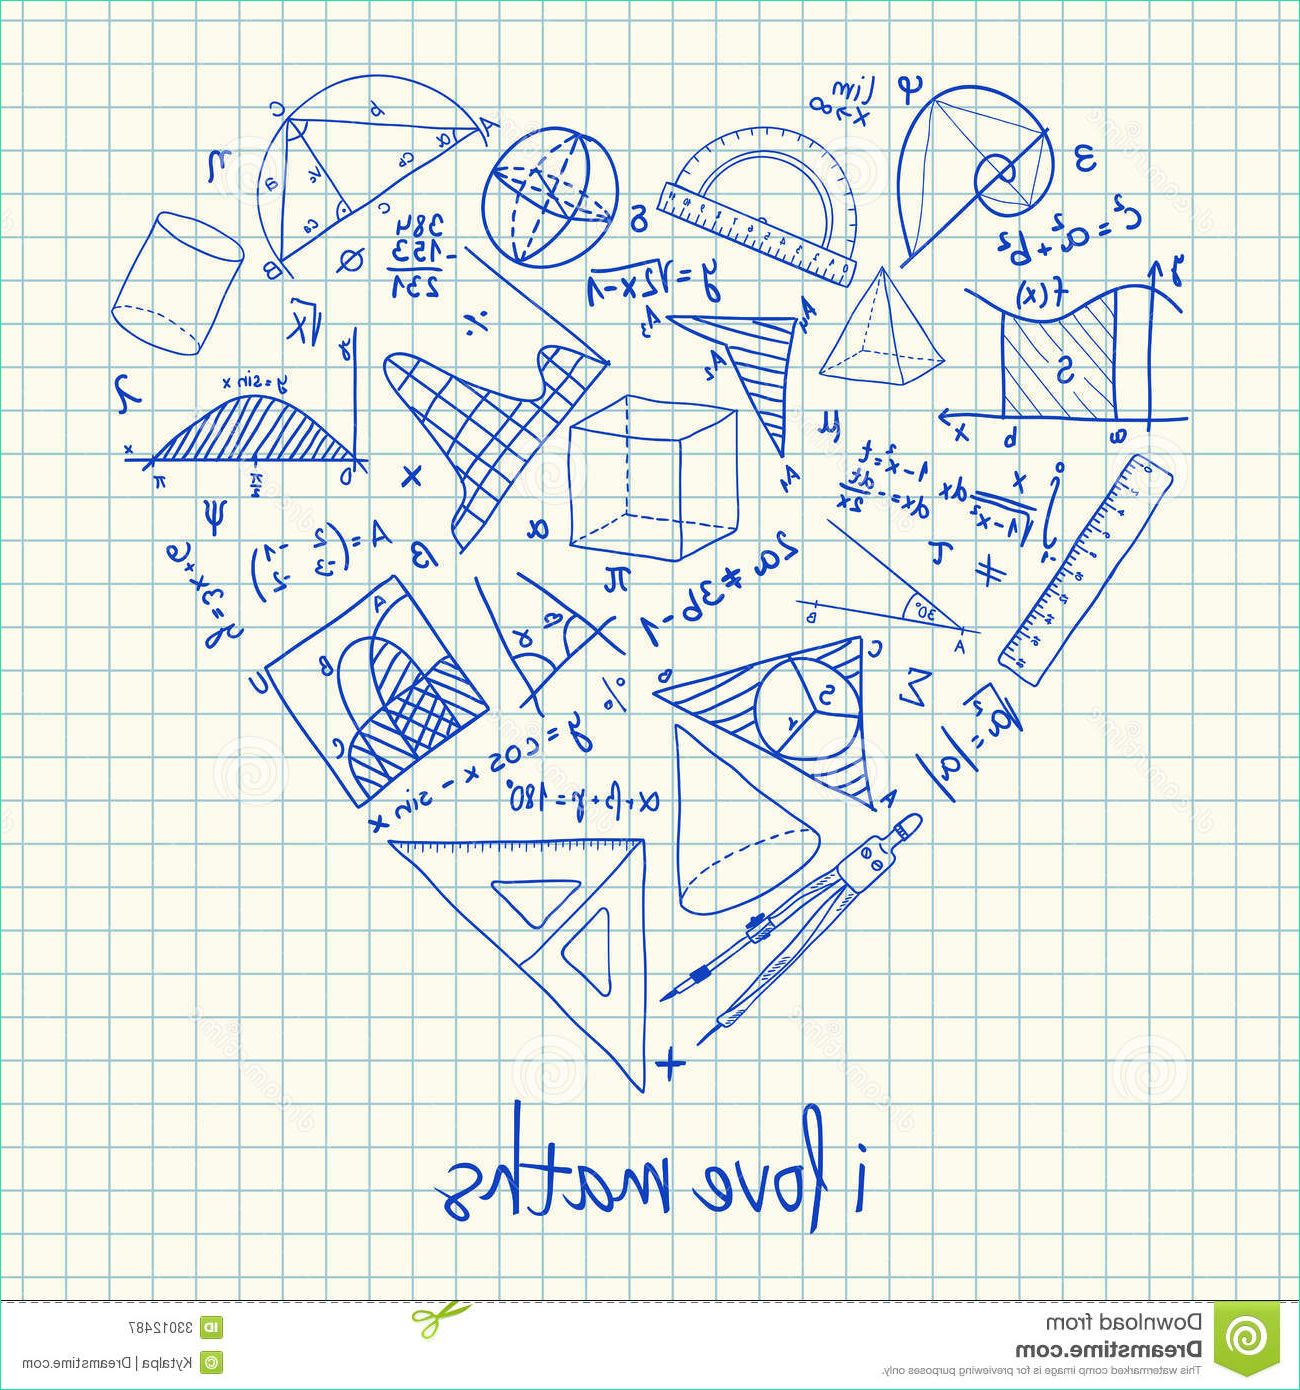 Mathematique Dessin Inspirant Galerie Maths Drawings In Heart Shape Royalty Free Stock